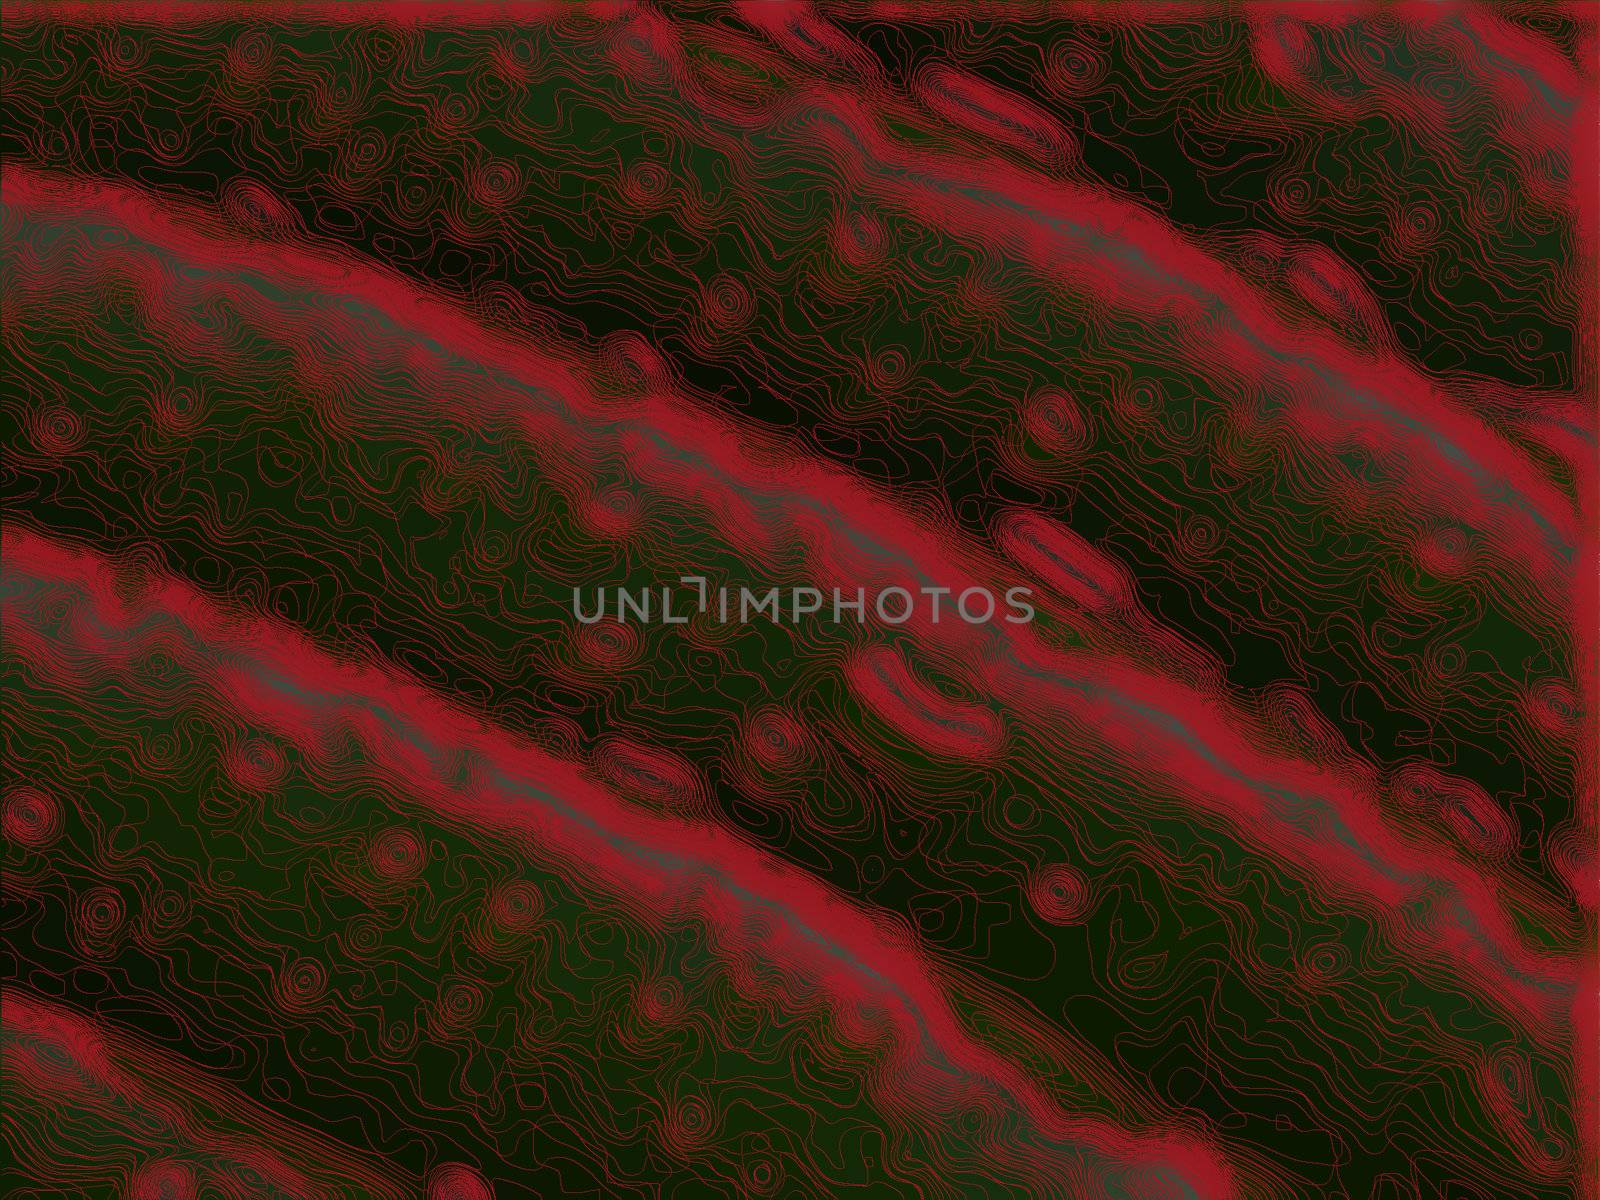 An image of wallpaper with unusual pattern and color.